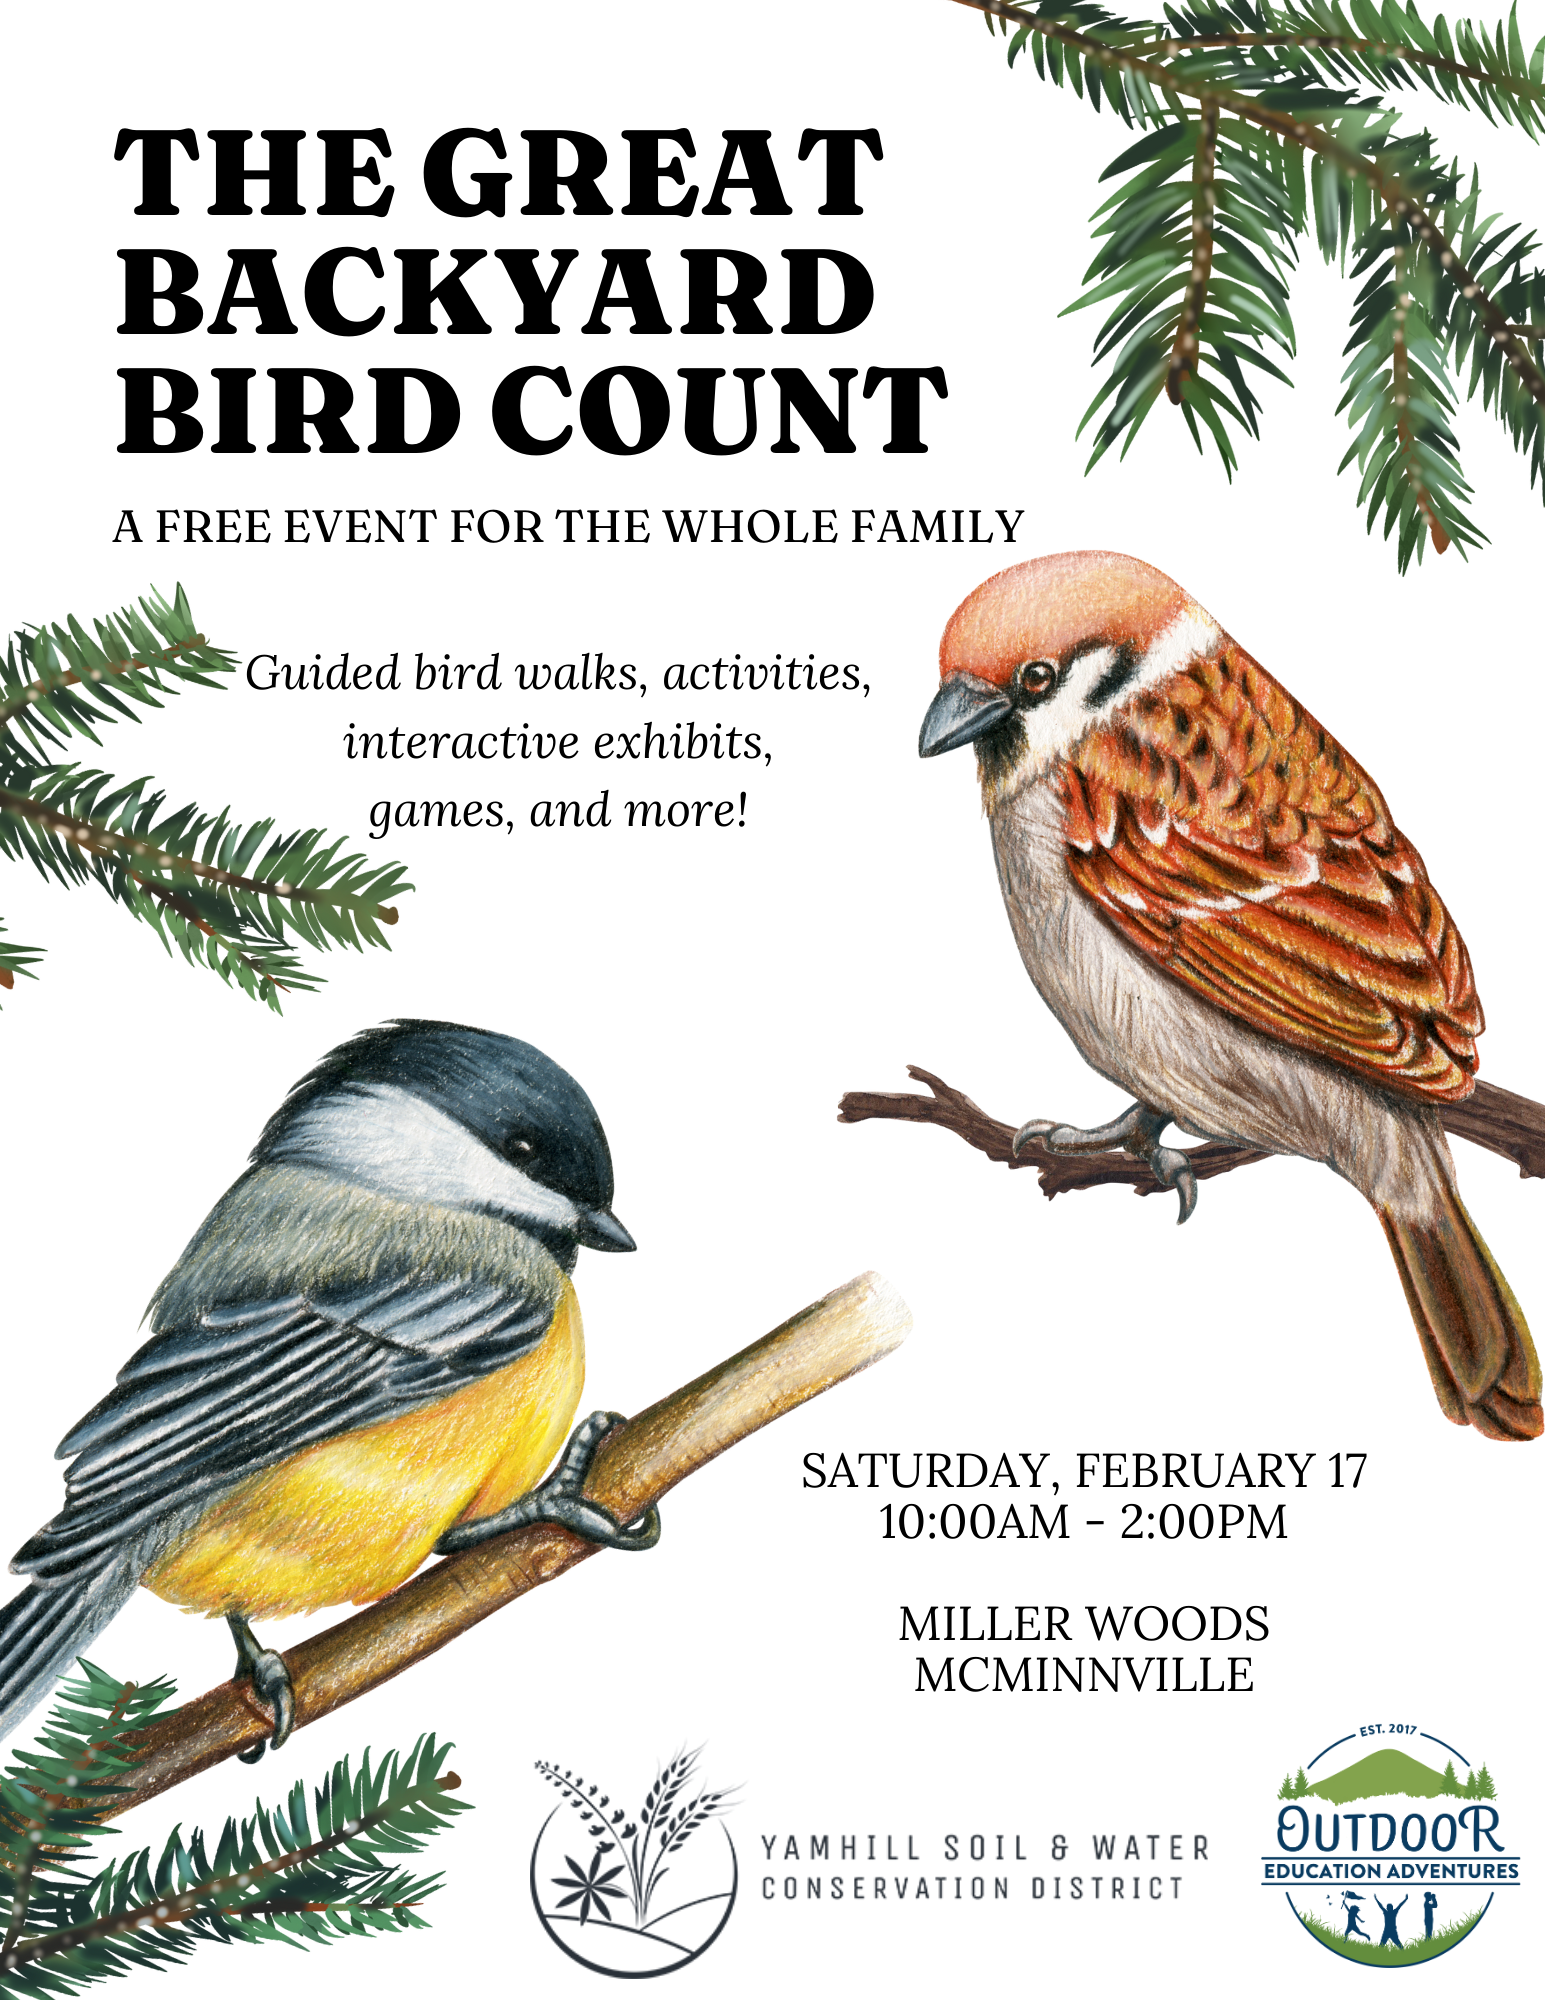 Image of the flyer for the backyard bird count with hand drawings of two birds